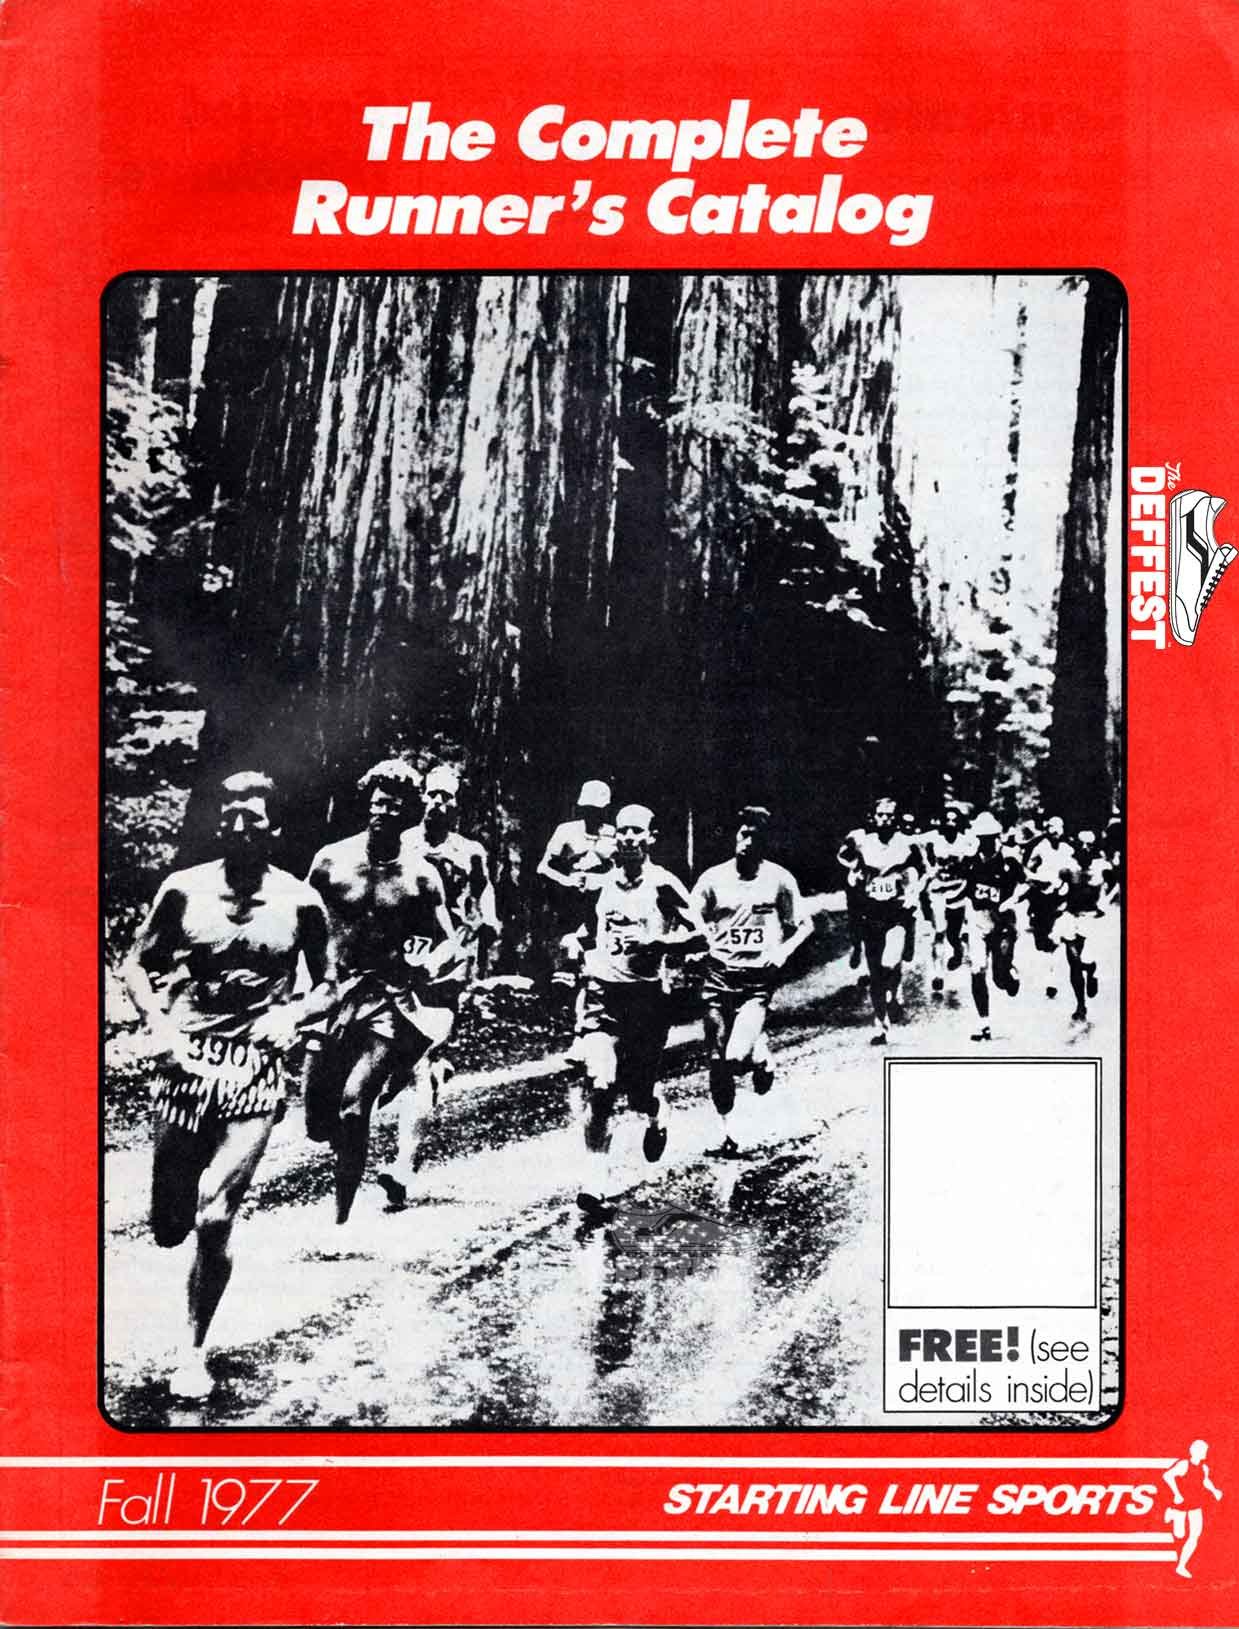 Starting Line Sports 'The Complete Runner's Catalog' Fall 1977 Cover